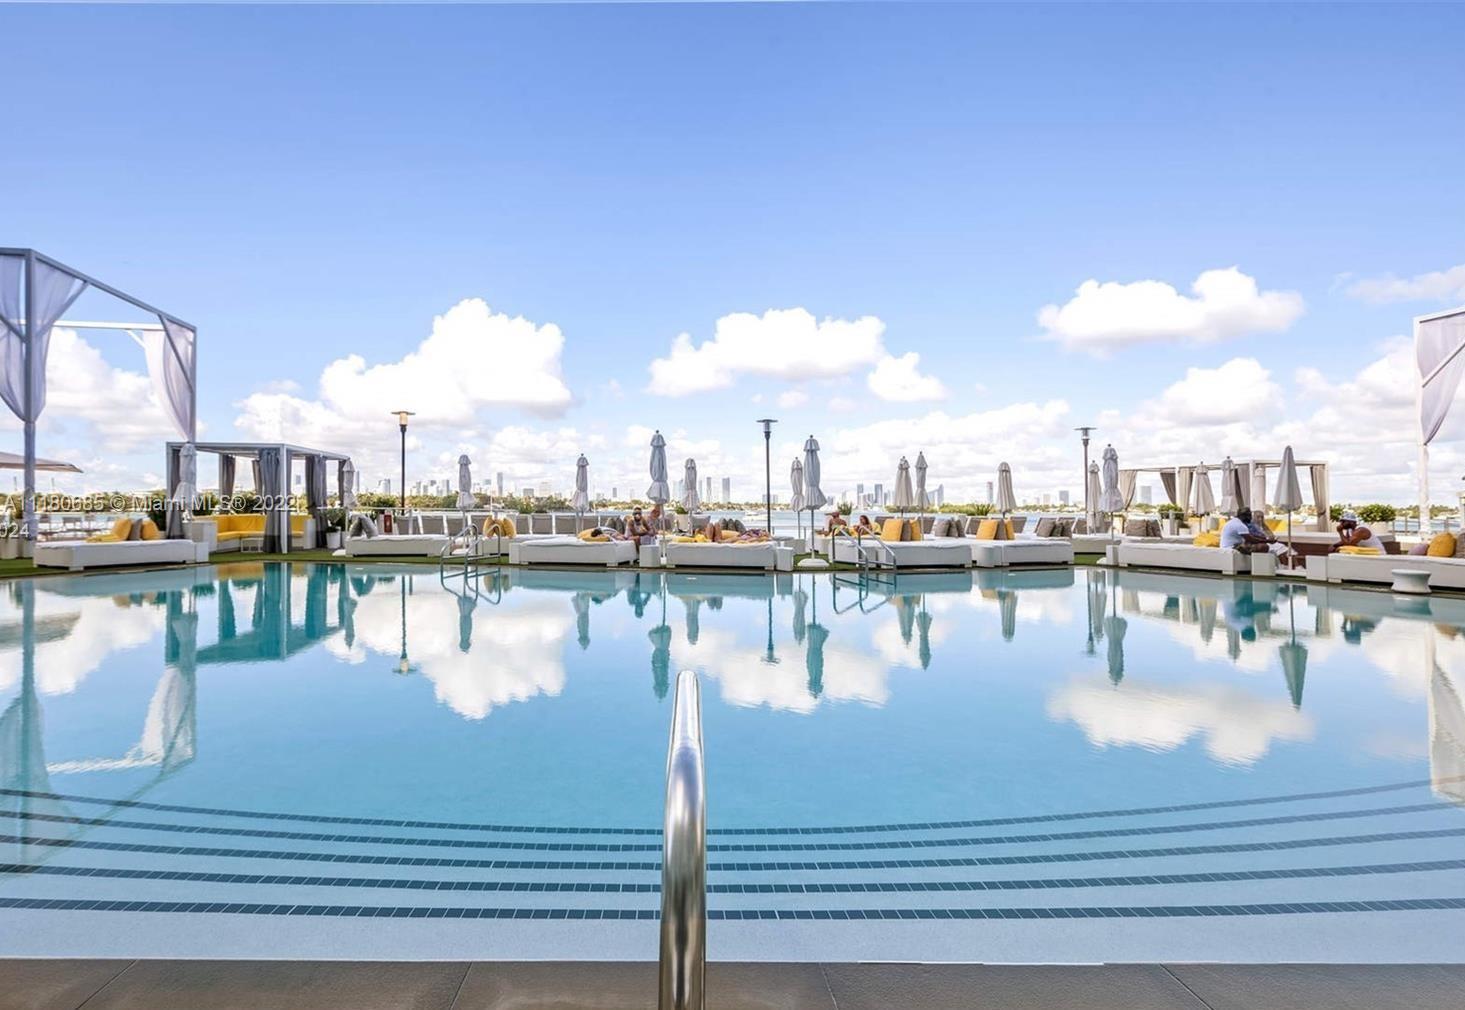 BEST SUNSET-, BAY- AND MIAMI SKYLINE VIEWS FROM THIS GREAT INVESTMENT PROPERTY OR SECOND HOME IN THE